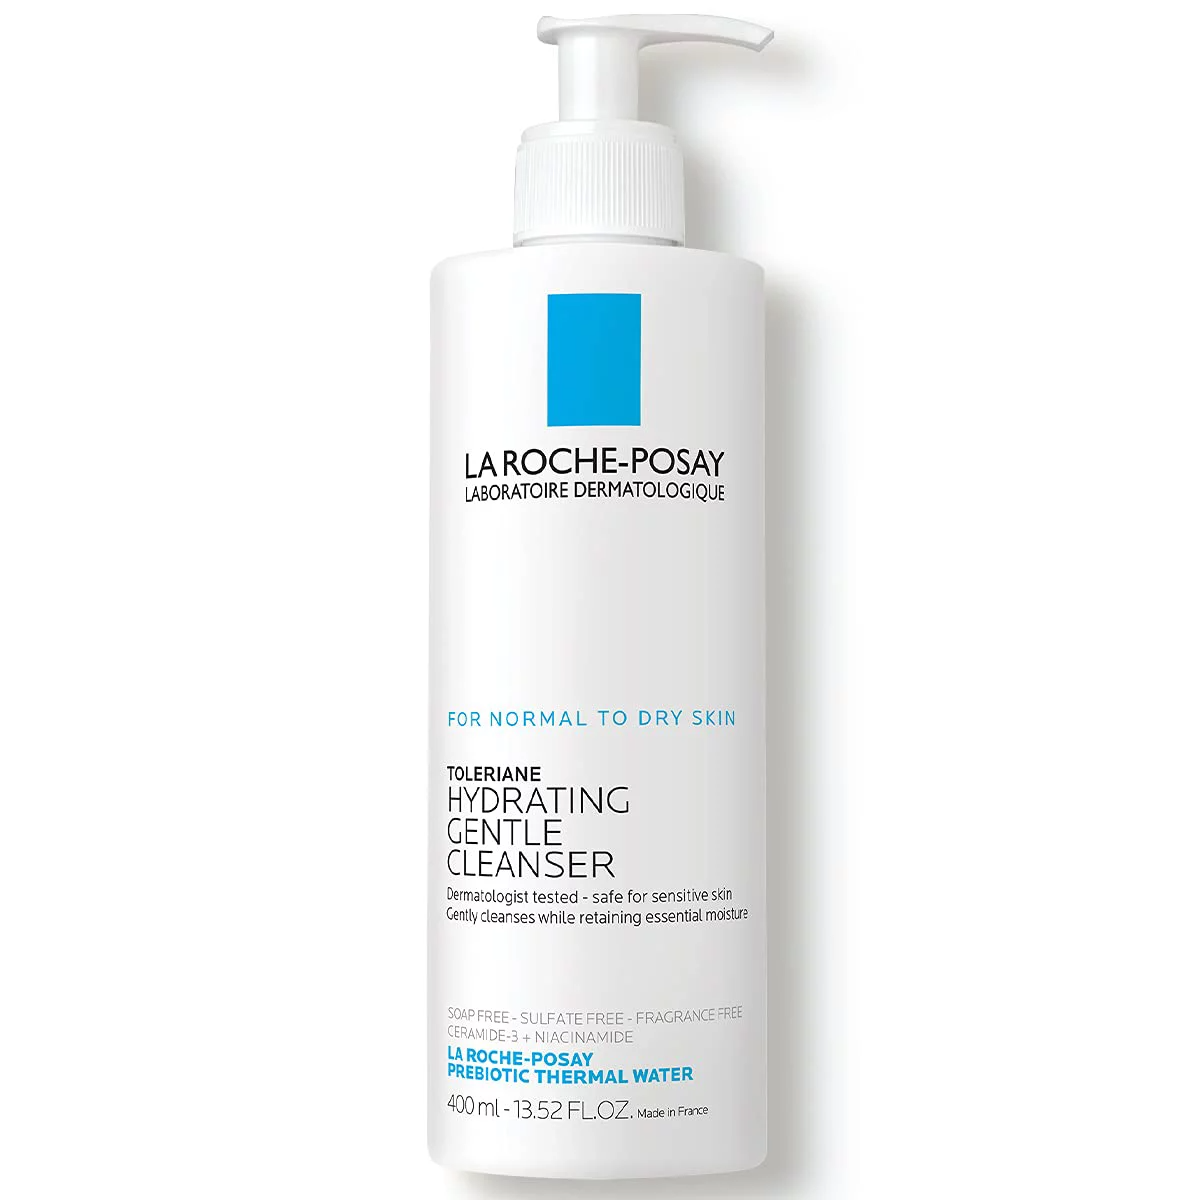 La Roche-Posay Toleriane Hydrating Gentle Facial Cleanser, $16, available here.